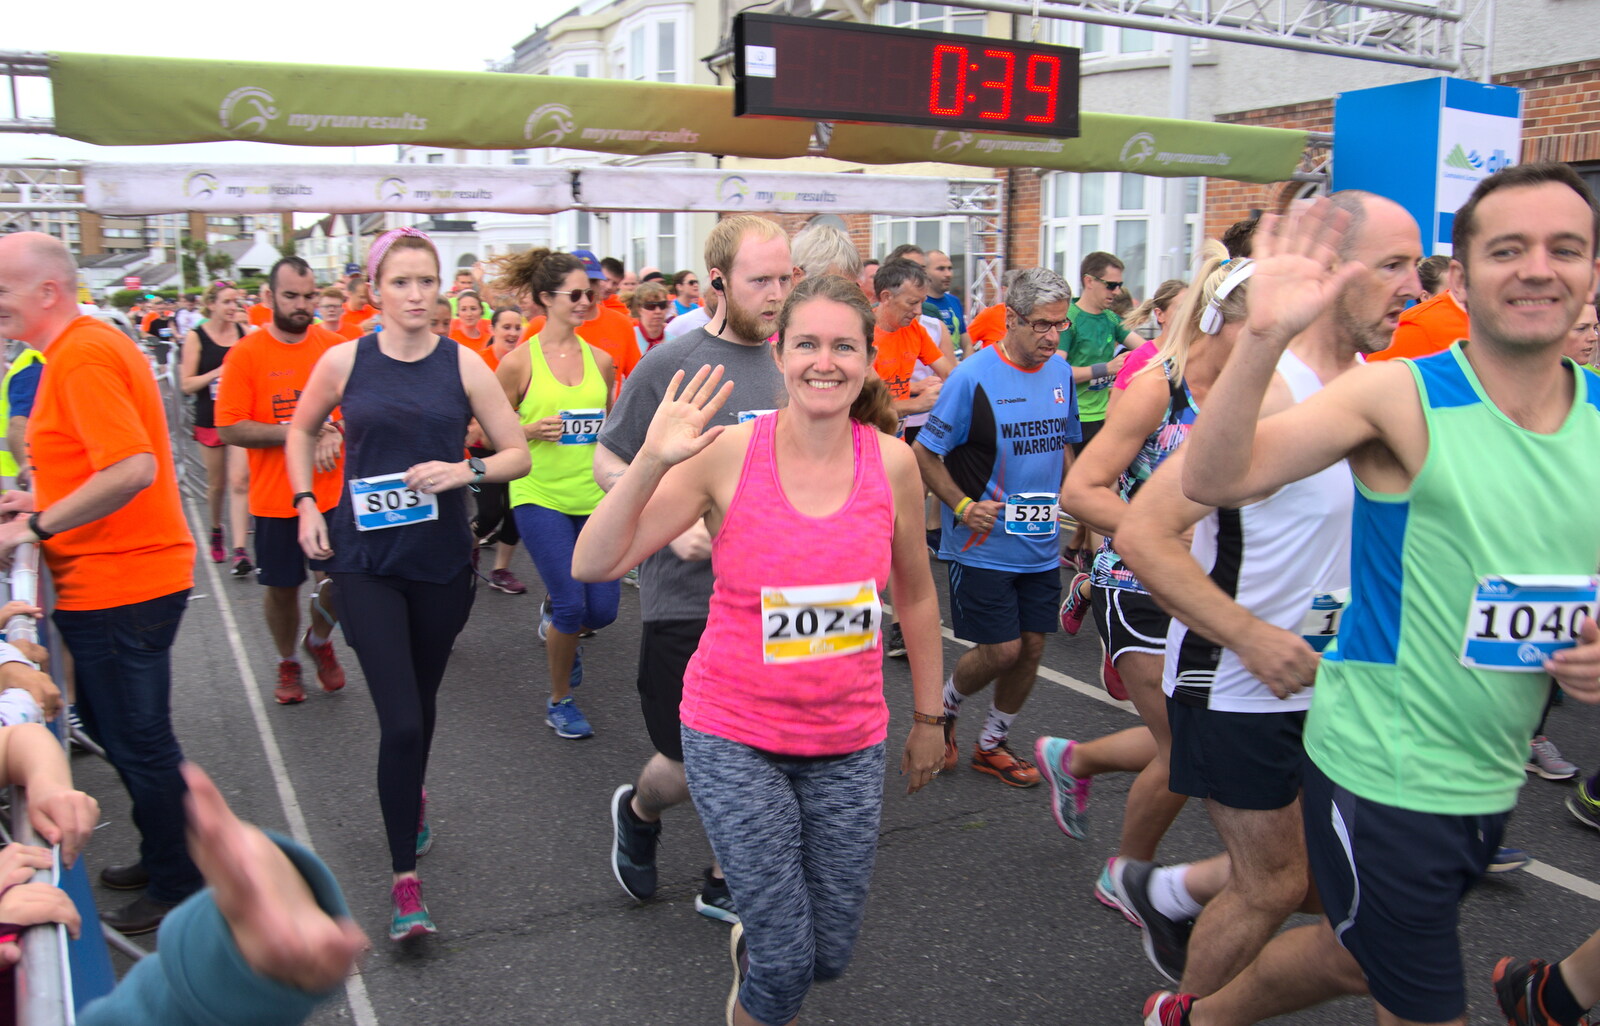 Isobel waves from The Dún Laoghaire 10k Run, County Dublin, Ireland - 6th August 2018